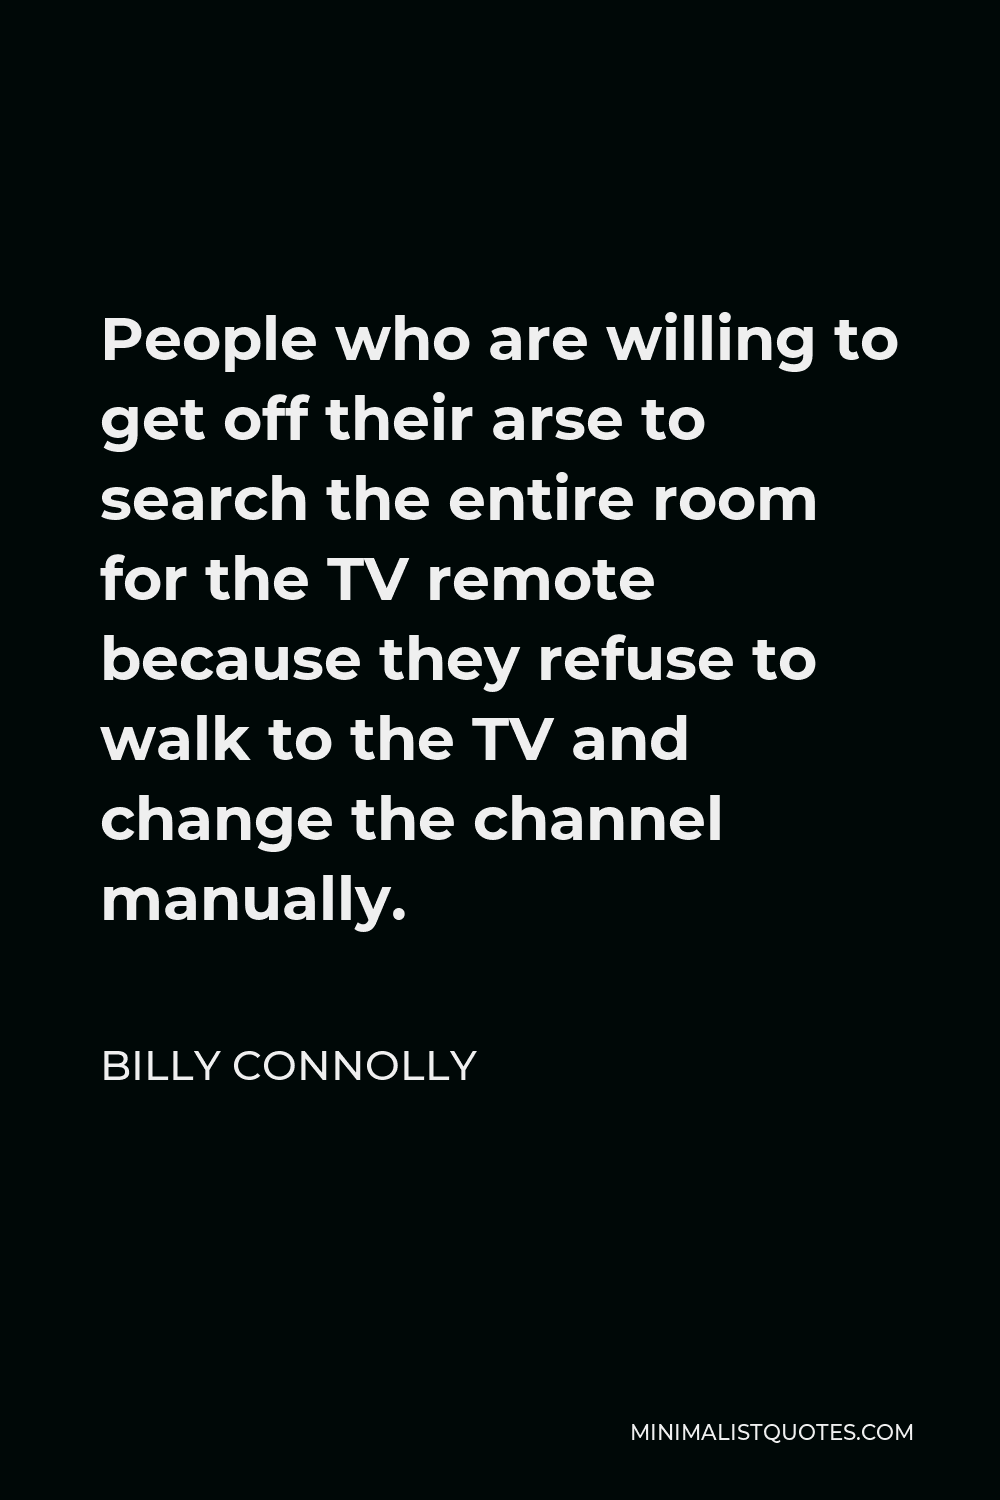 Billy Connolly Quote - People who are willing to get off their arse to search the entire room for the TV remote because they refuse to walk to the TV and change the channel manually.